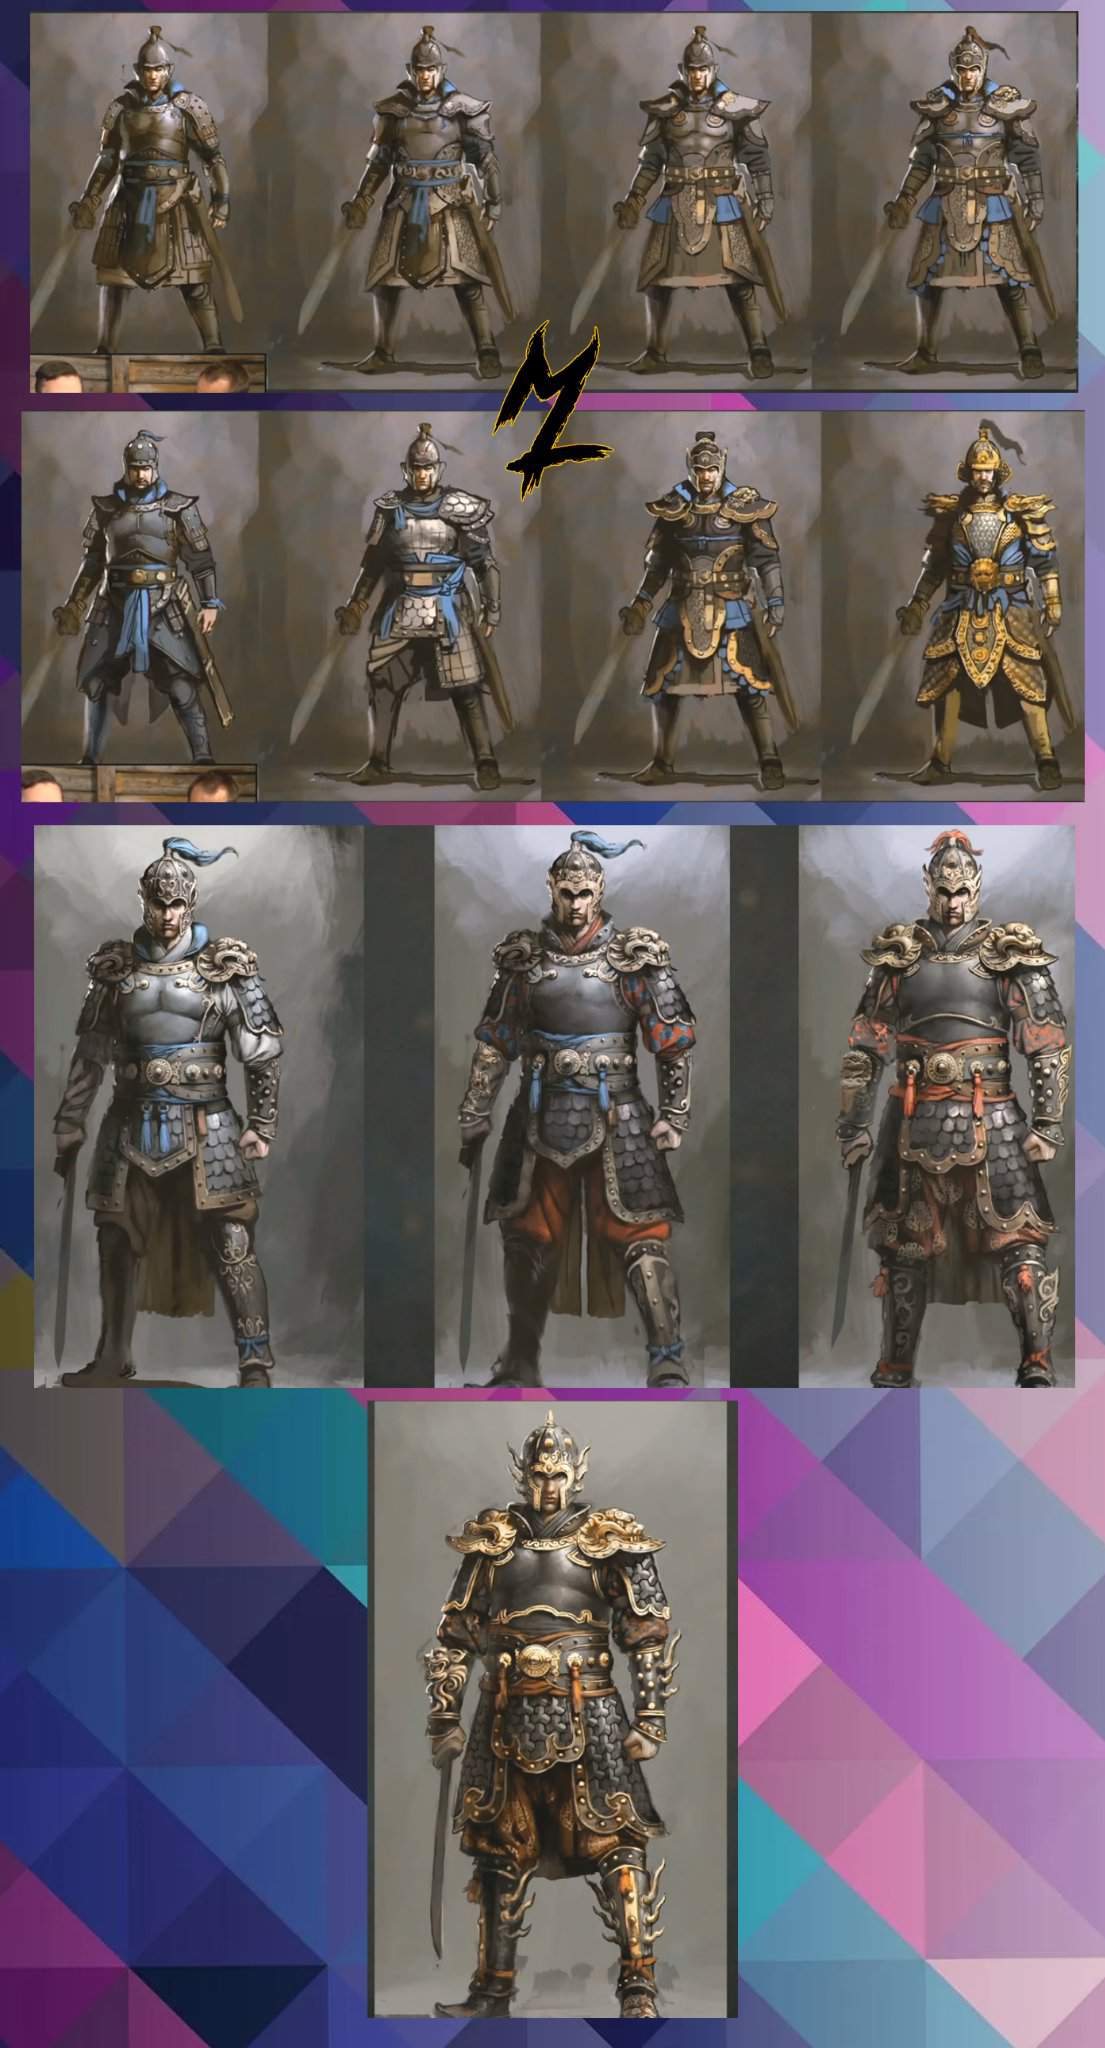 Historical Chinese armor For Honor Amino.